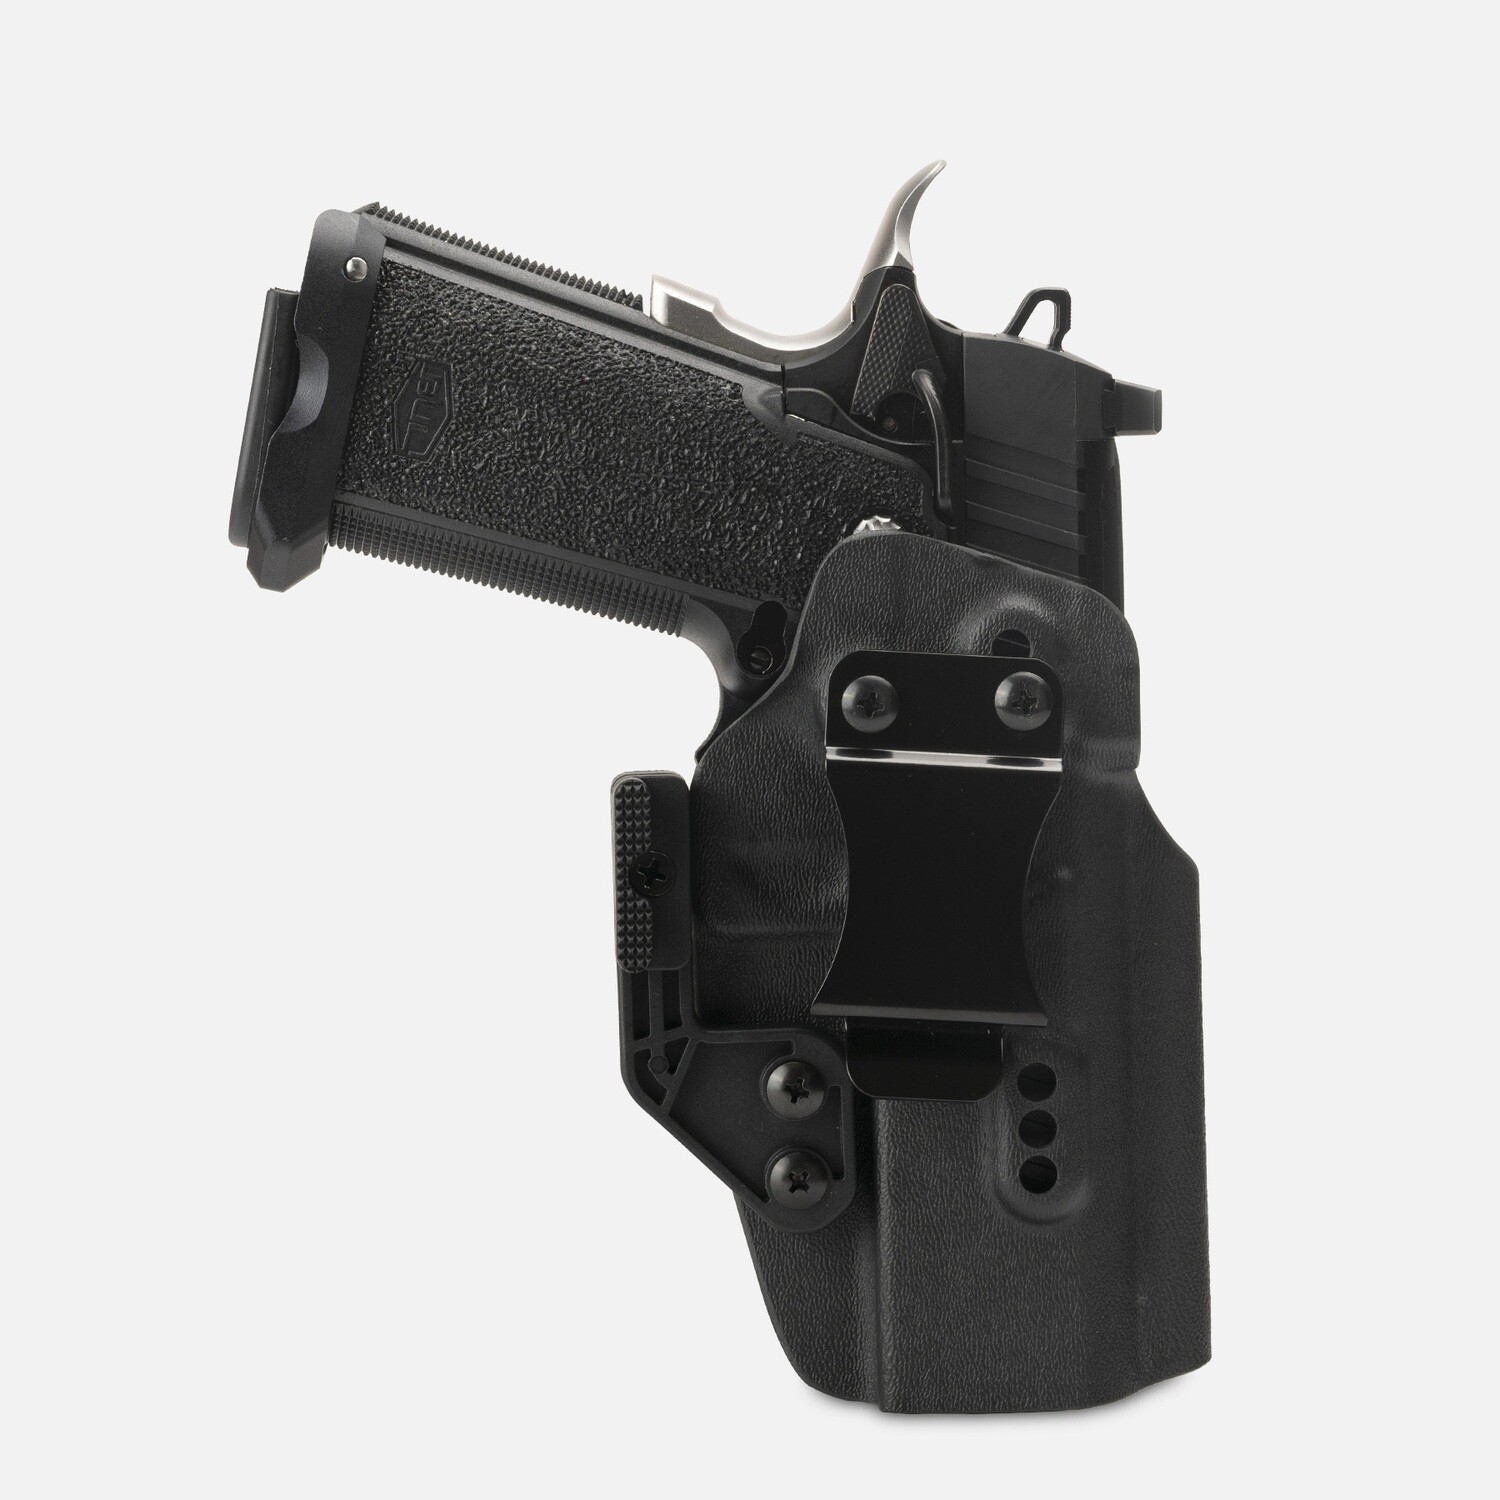 PRIORITY 1 HOLSTER - IWB - SAS II TAC 4.25" - RIGHT